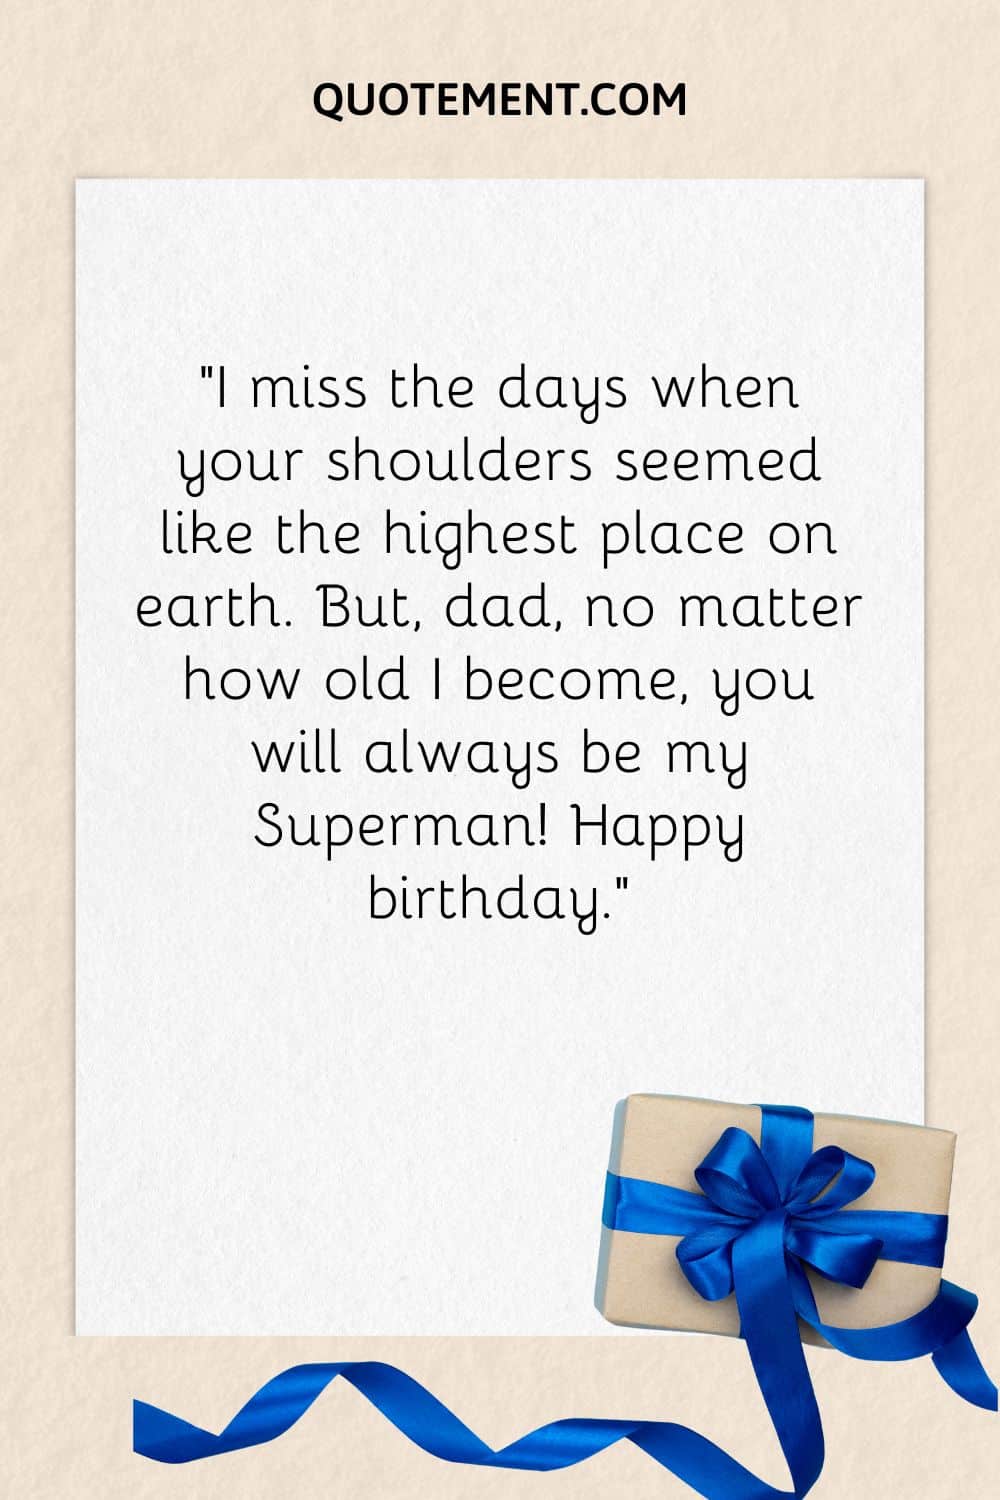 “I miss the days when your shoulders seemed like the highest place on earth. But, dad, no matter how old I become, you will always be my Superman! Happy birthday.”